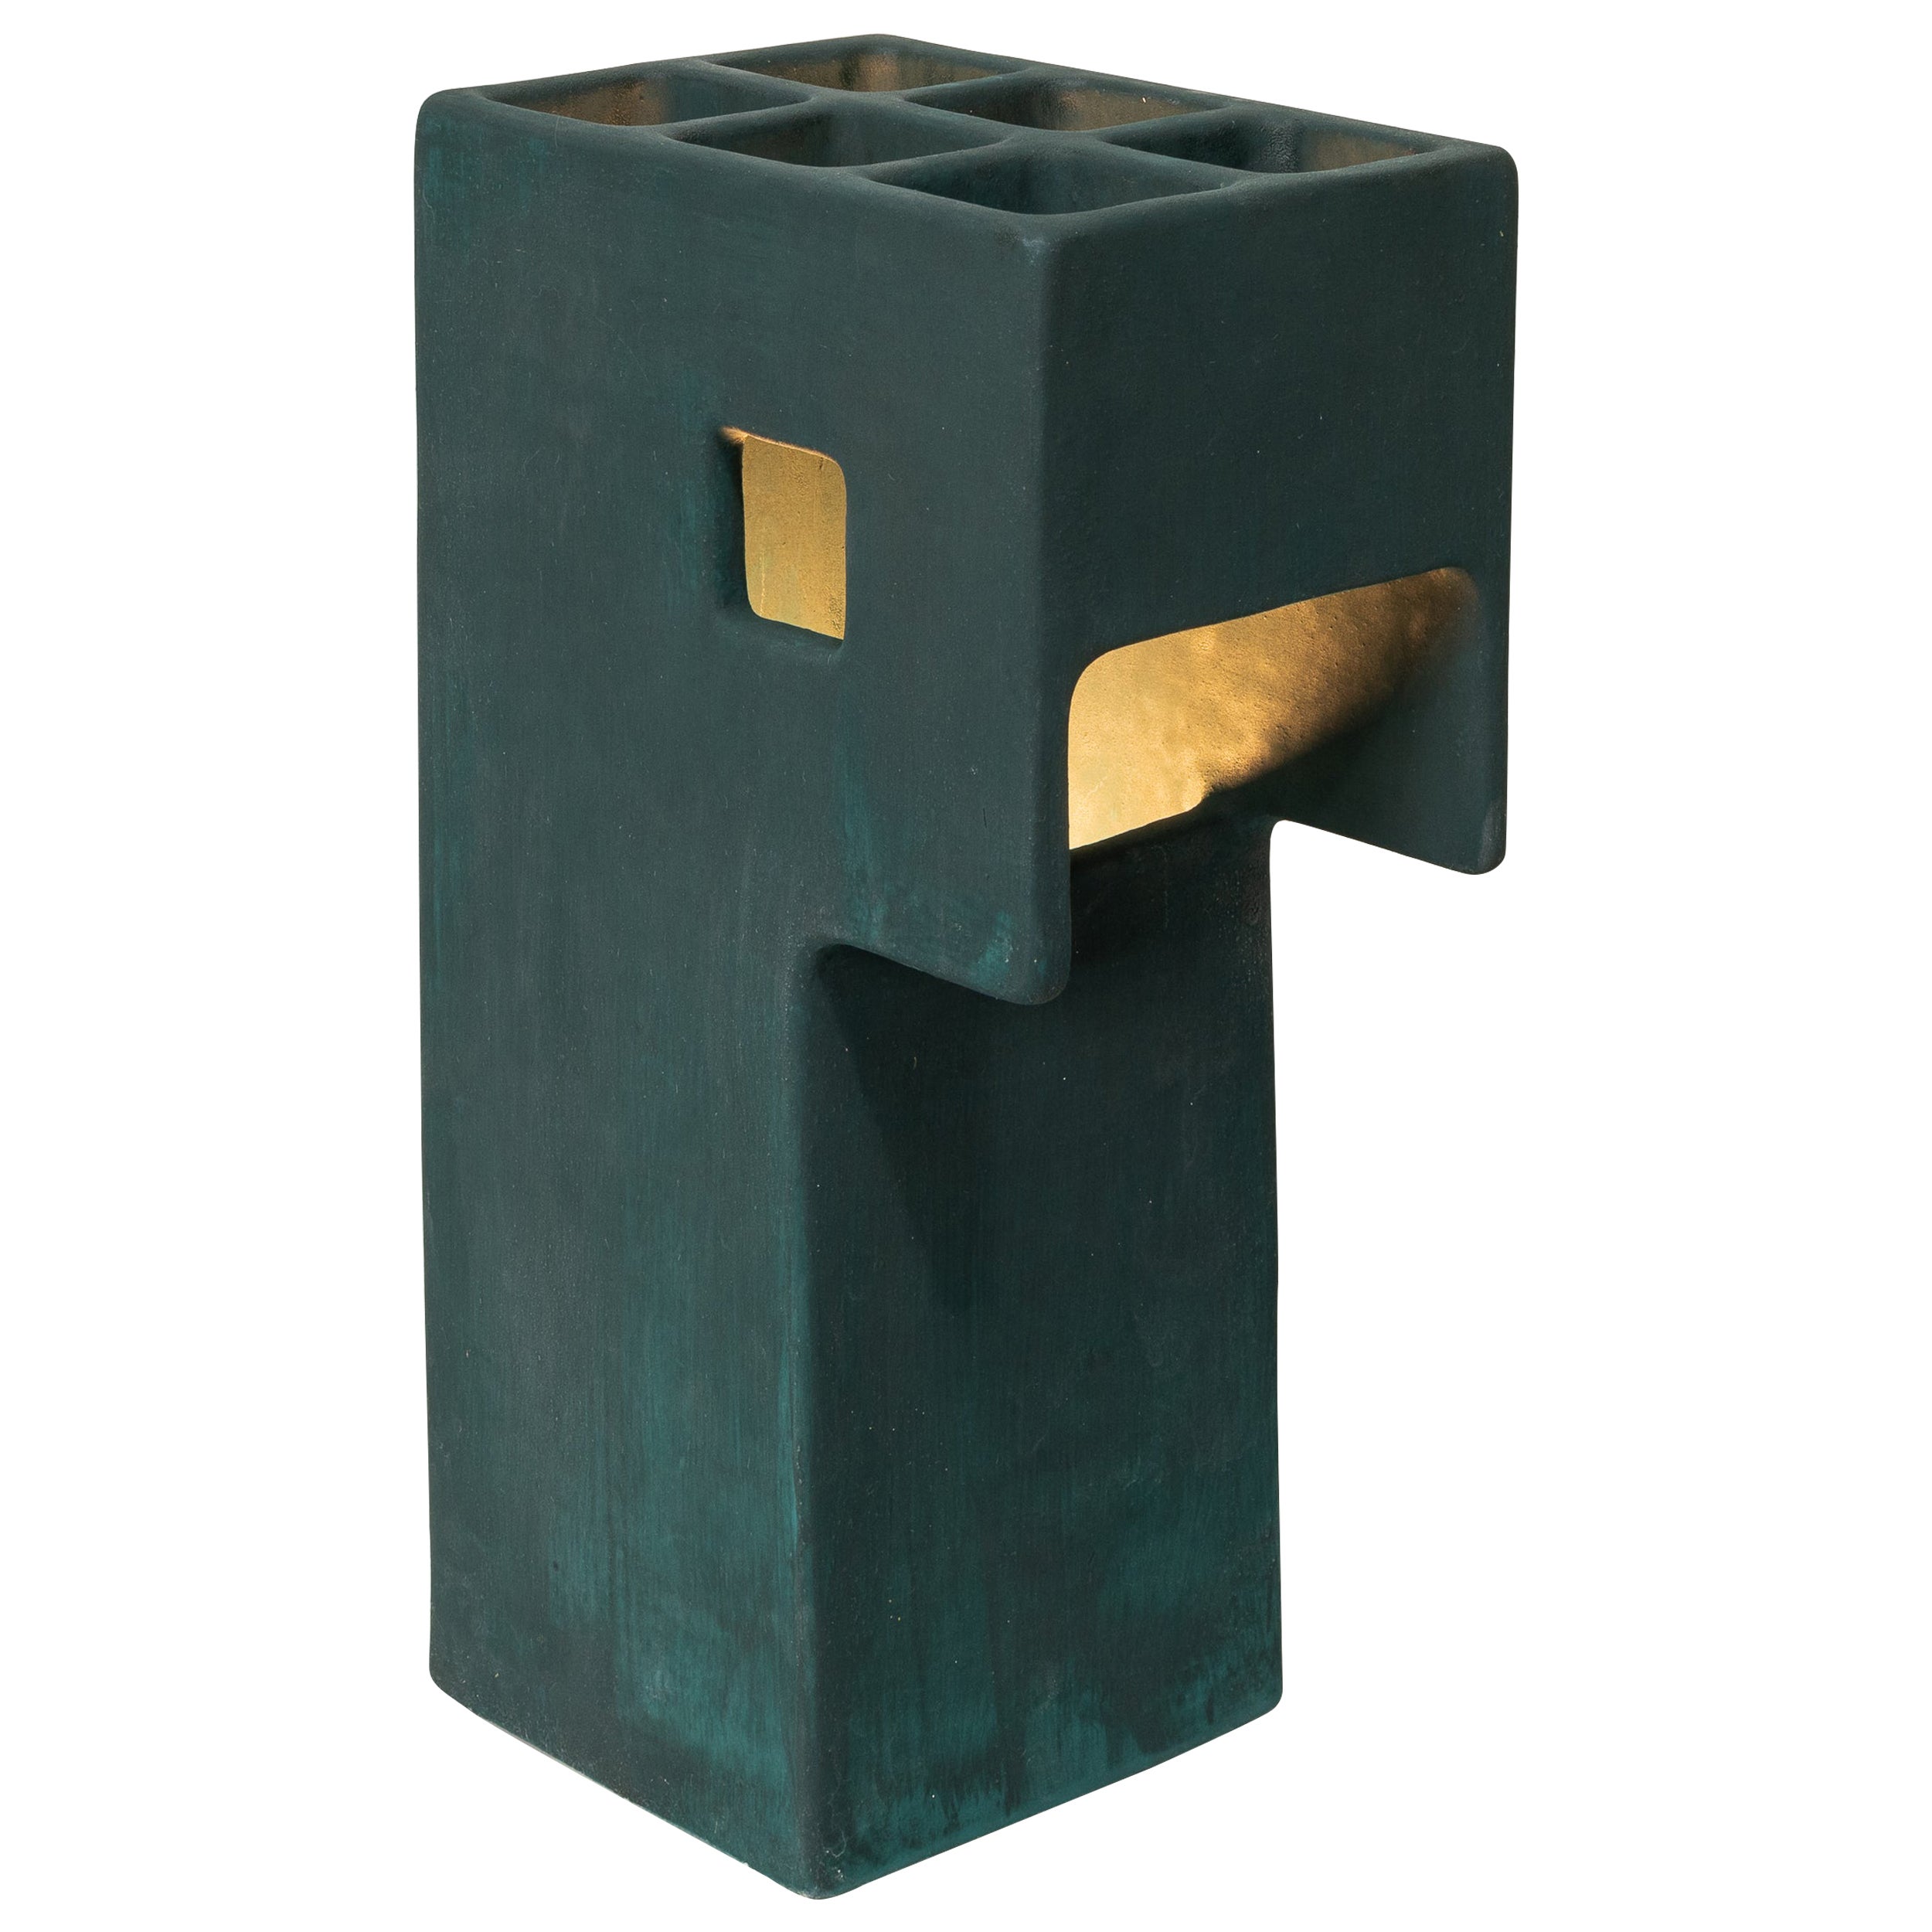 Ding Dong Table Lamp by Luft Tanaka, ceramic, dark green, brutalist, geometric For Sale